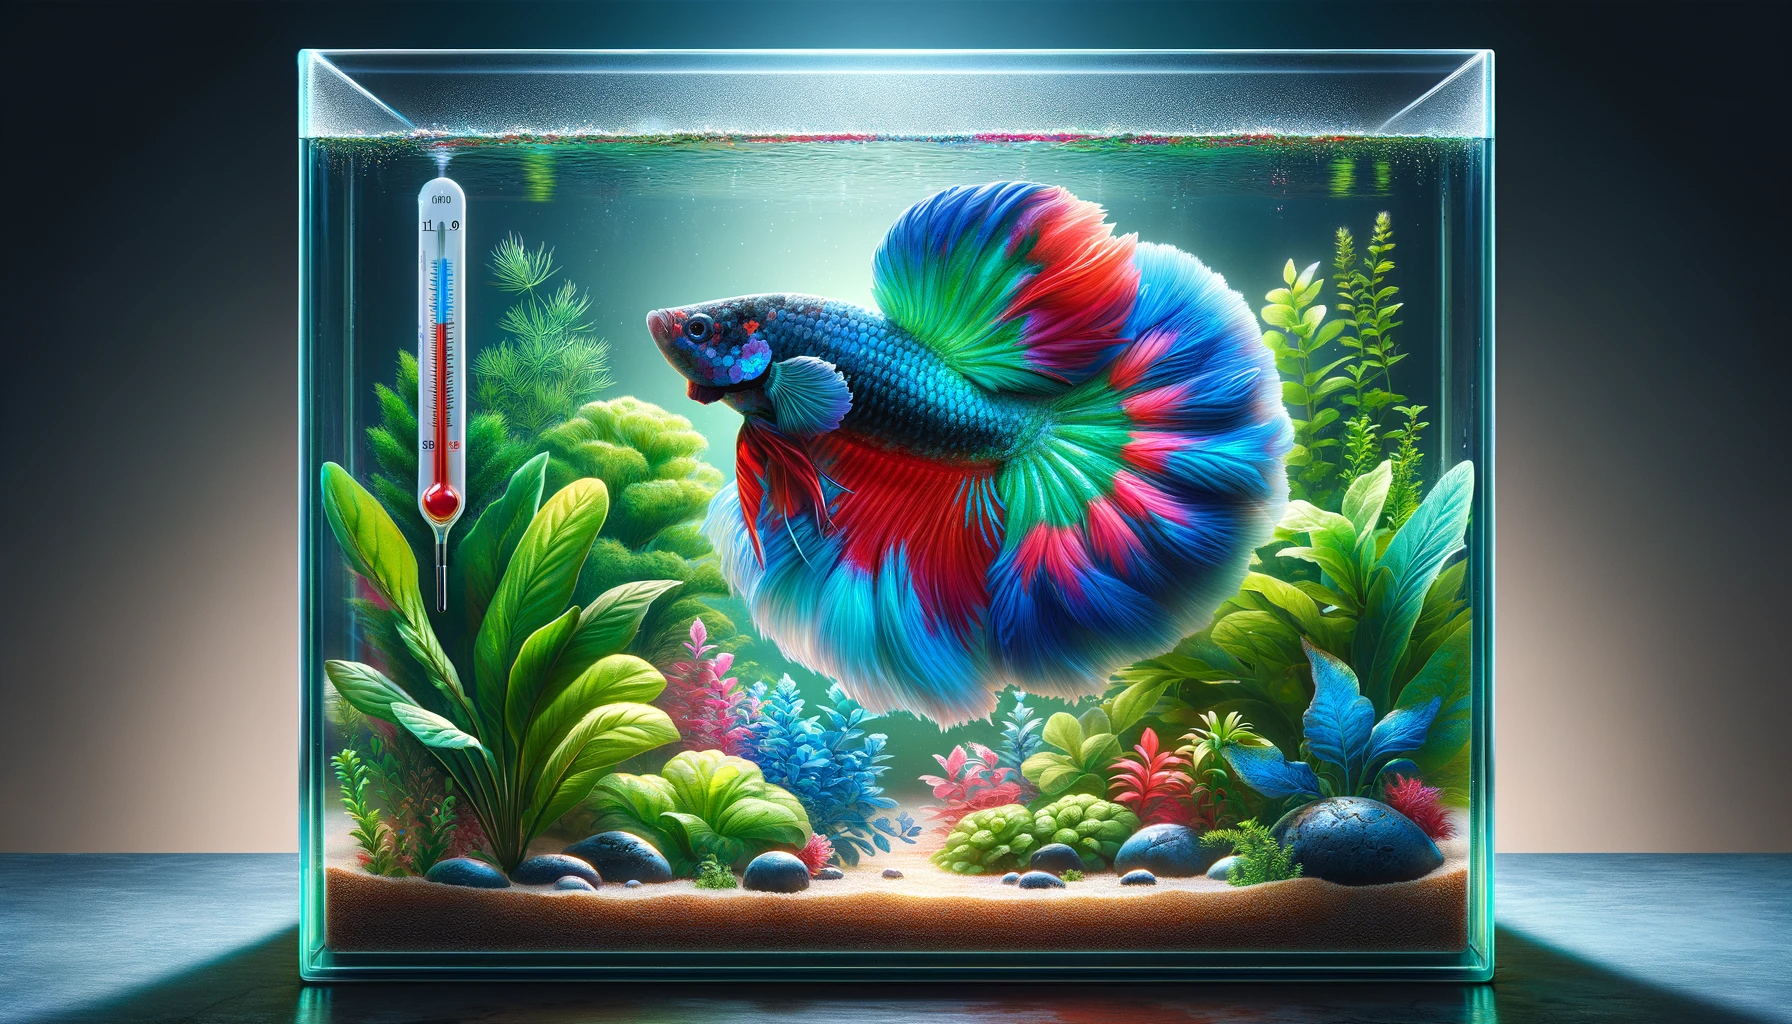 Betta fish changing color